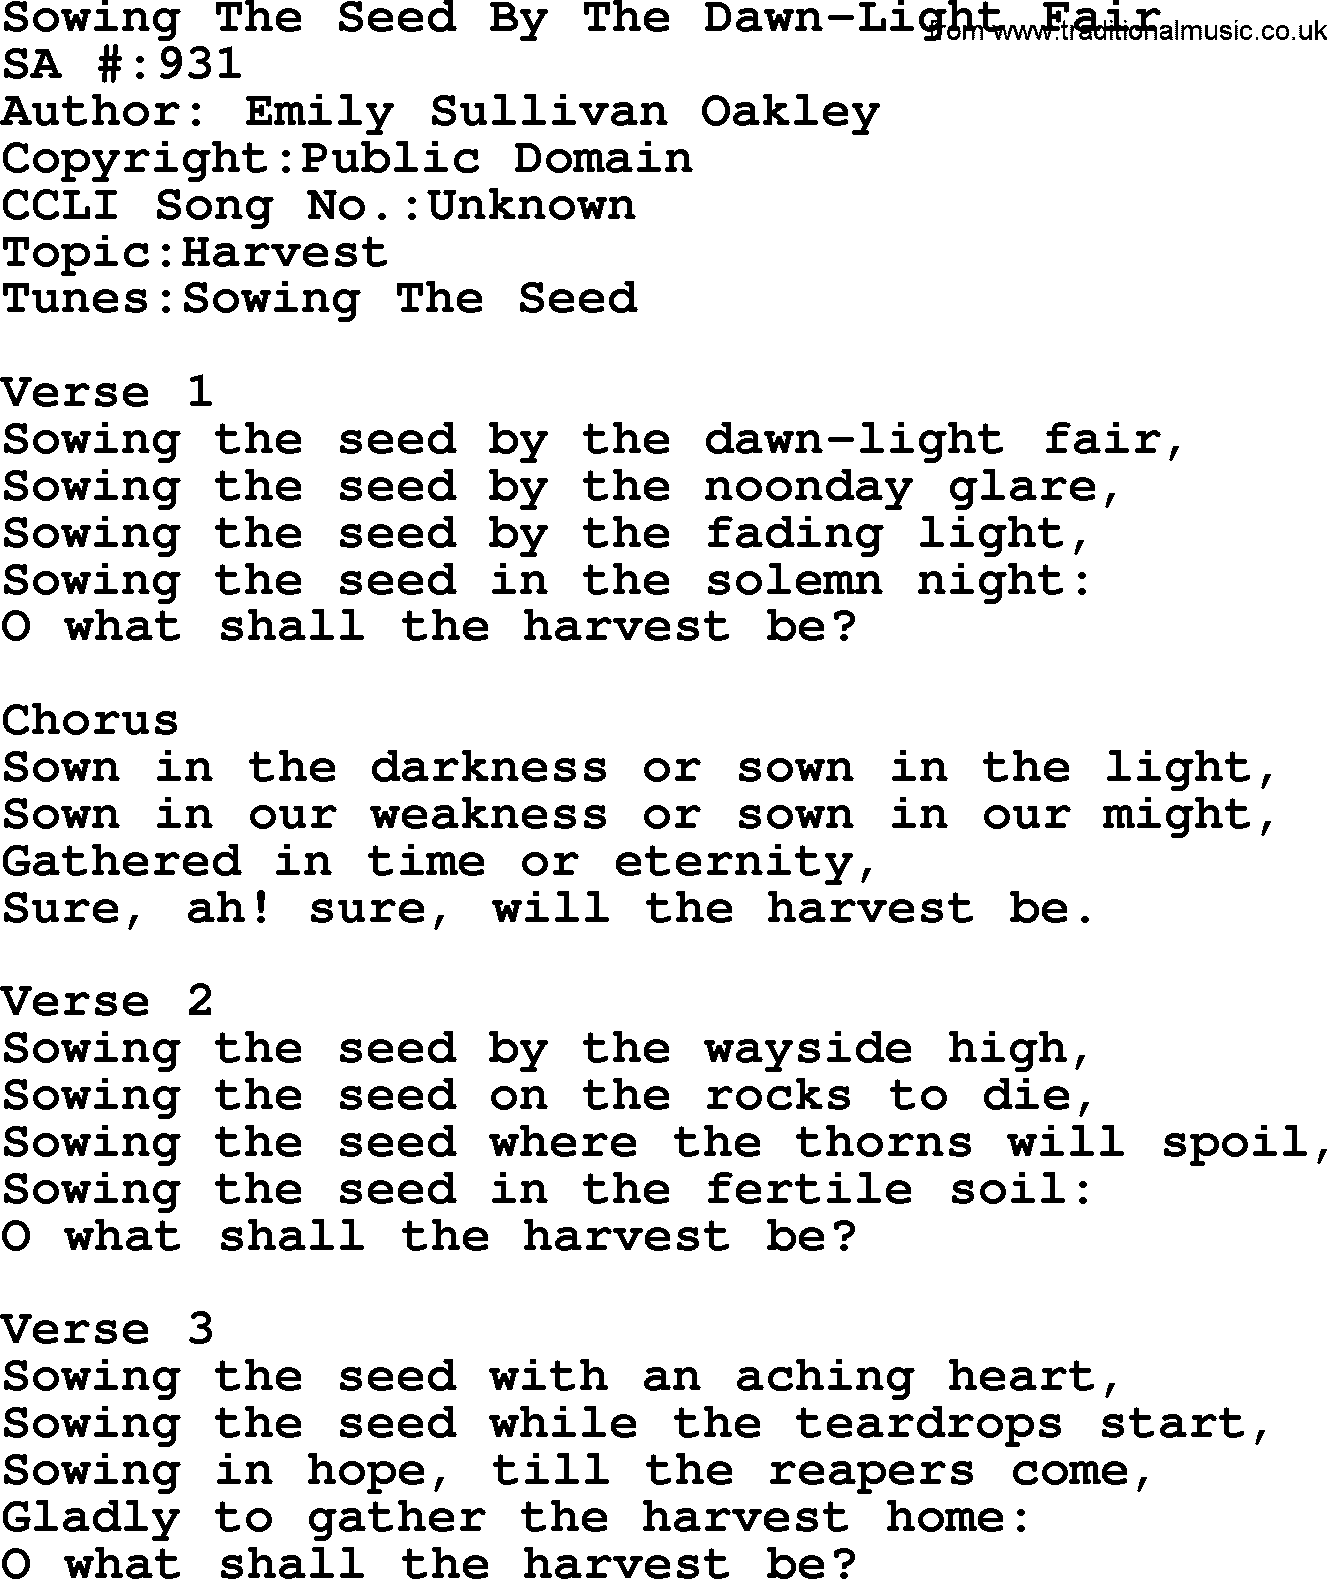 Salvation Army Hymnal, title: Sowing The Seed By The Dawn-Light Fair, with lyrics and PDF,